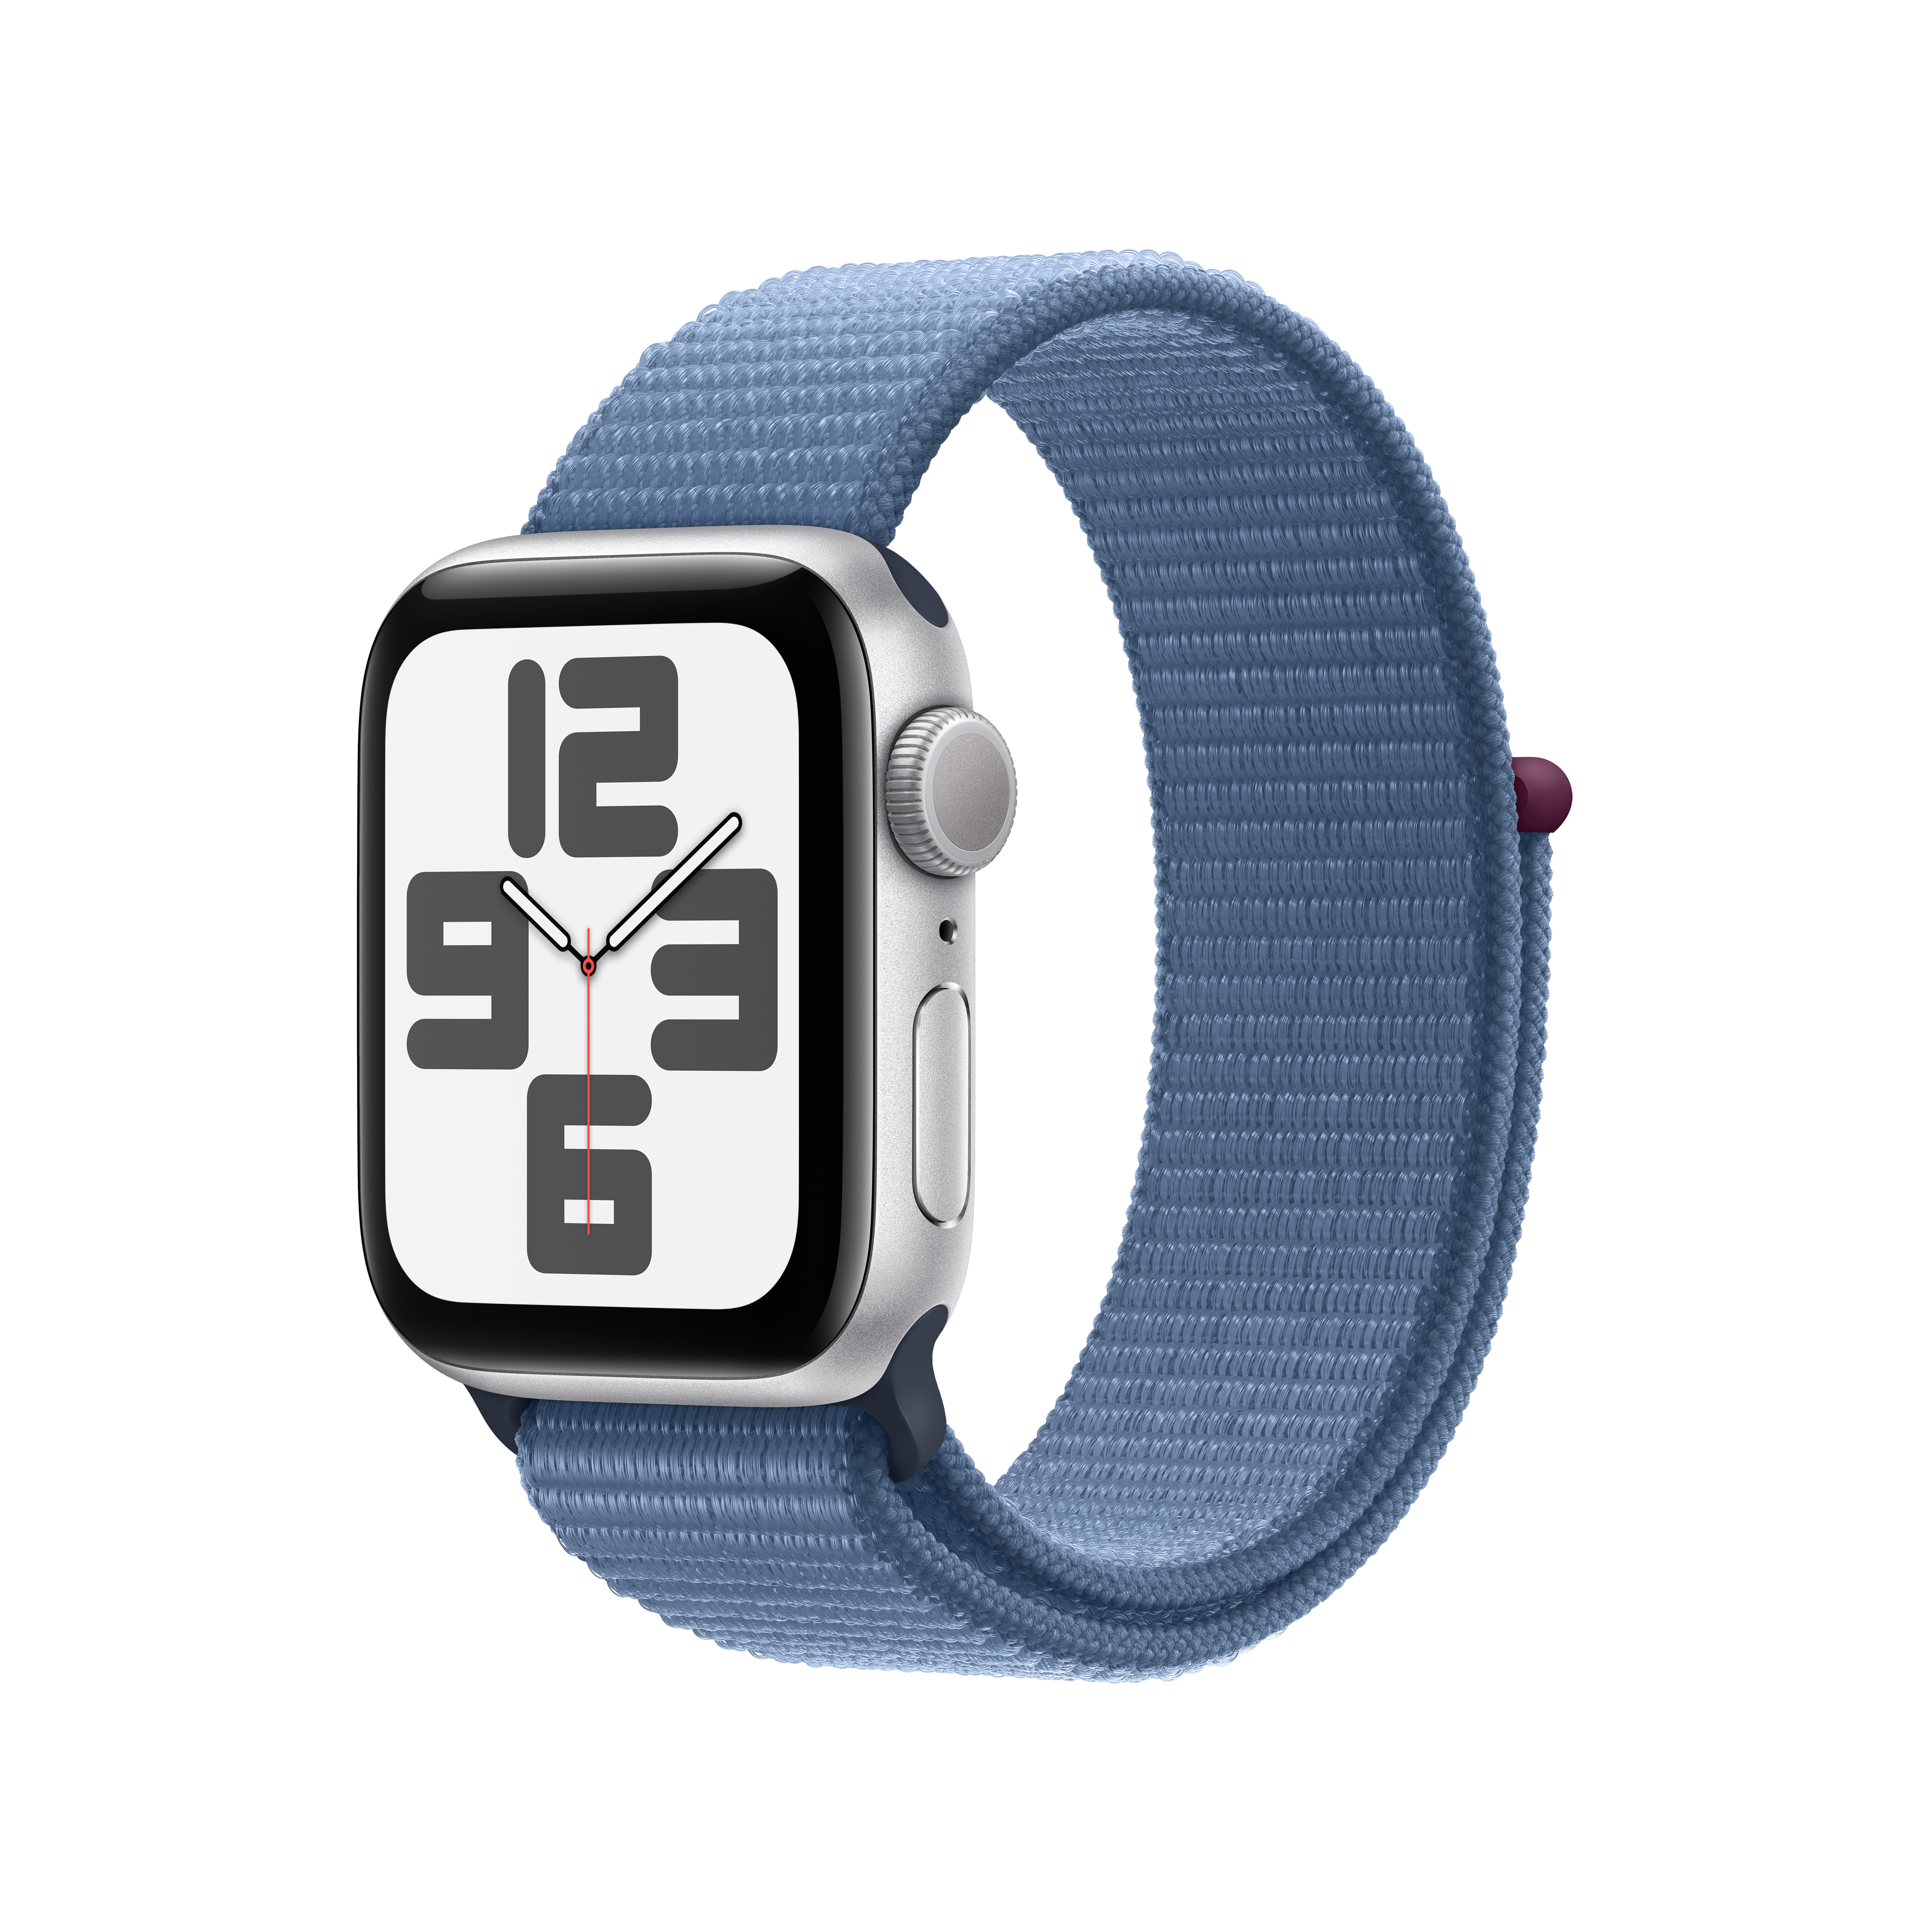 Apple Watch SE (2nd Gen) GPS 40mm Silver Aluminum Case with Winter Blue Sport Loop. Fitness & Sleep Tracker, Crash Detection, Heart Rate Monitor - image 1 of 9